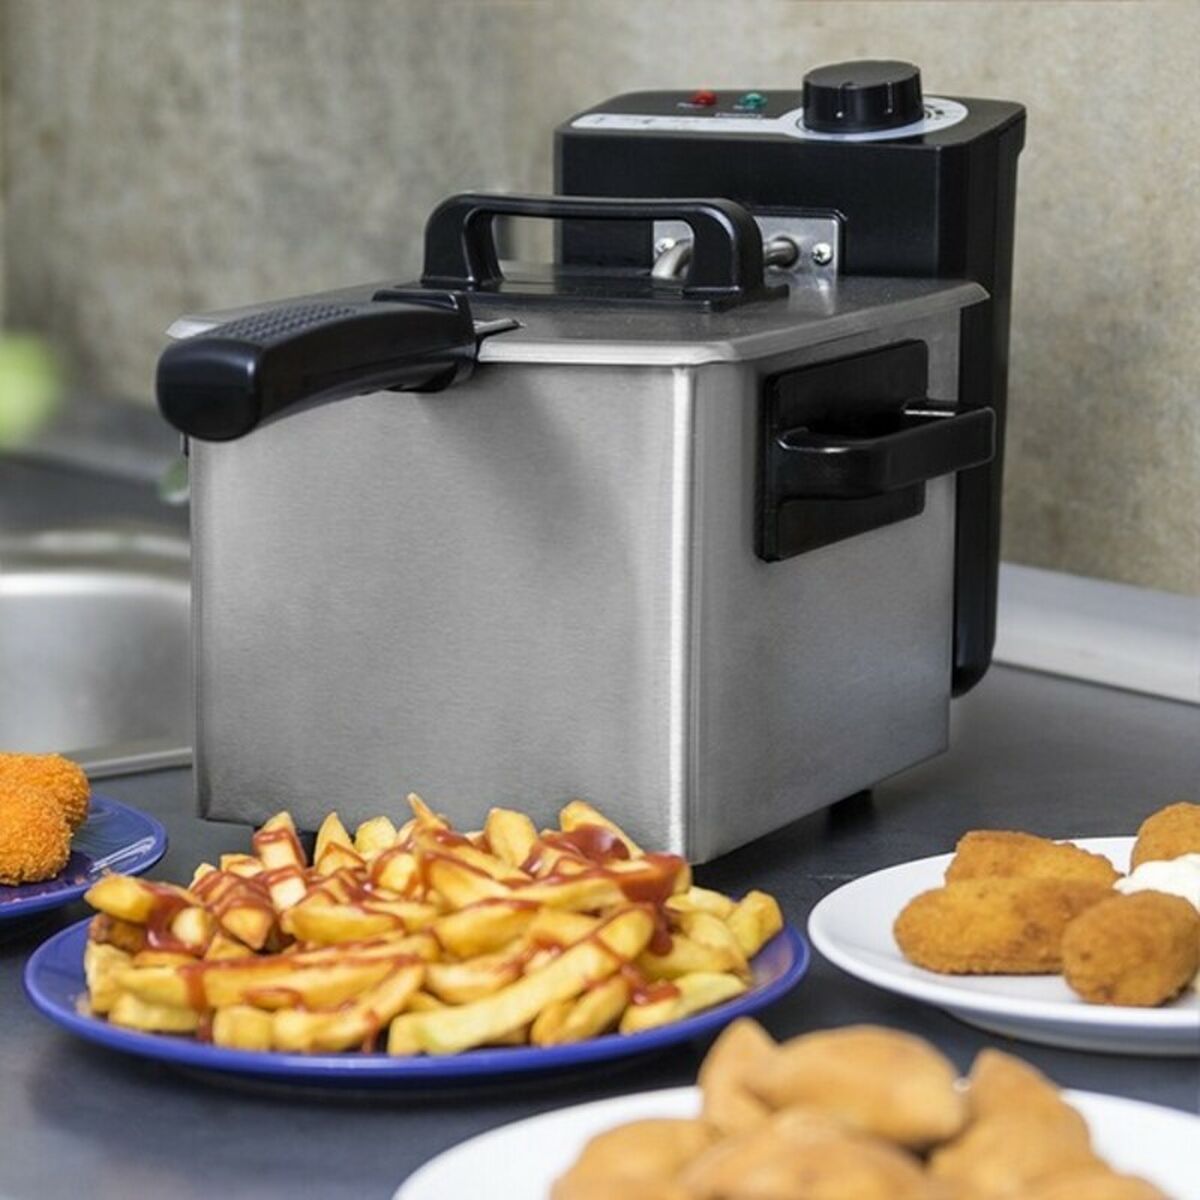 Fritteuse Cecotec Cleanfry 1,5 L 1000W Rostfreier stahl - CA International 